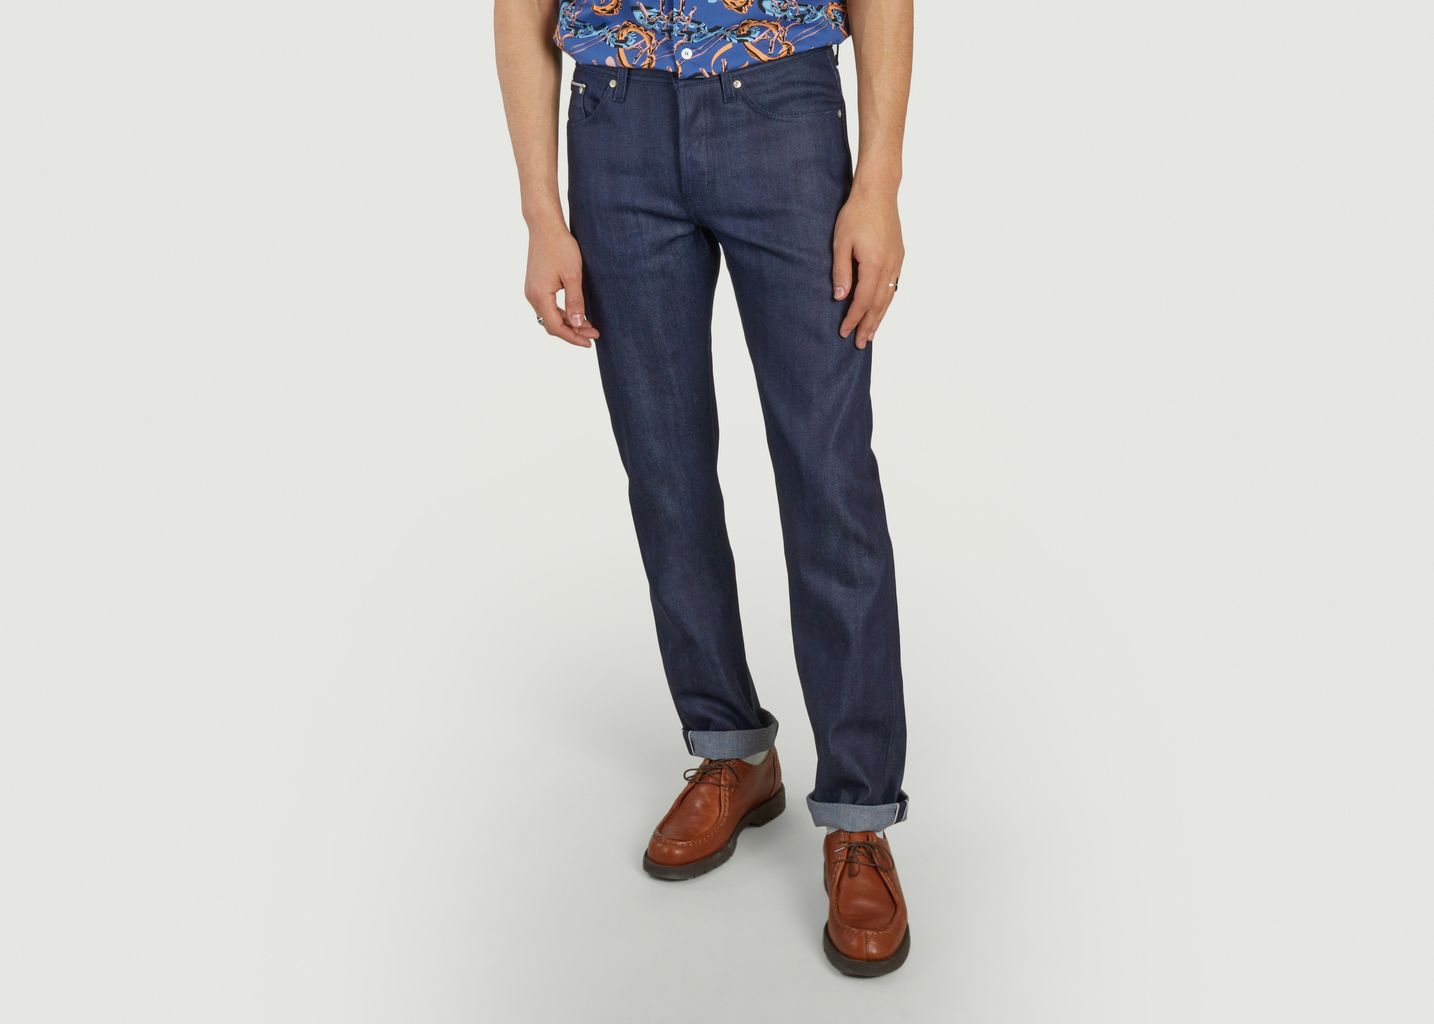 Weird Guy Spring Garden Selvedge Jeans - Naked and Famous